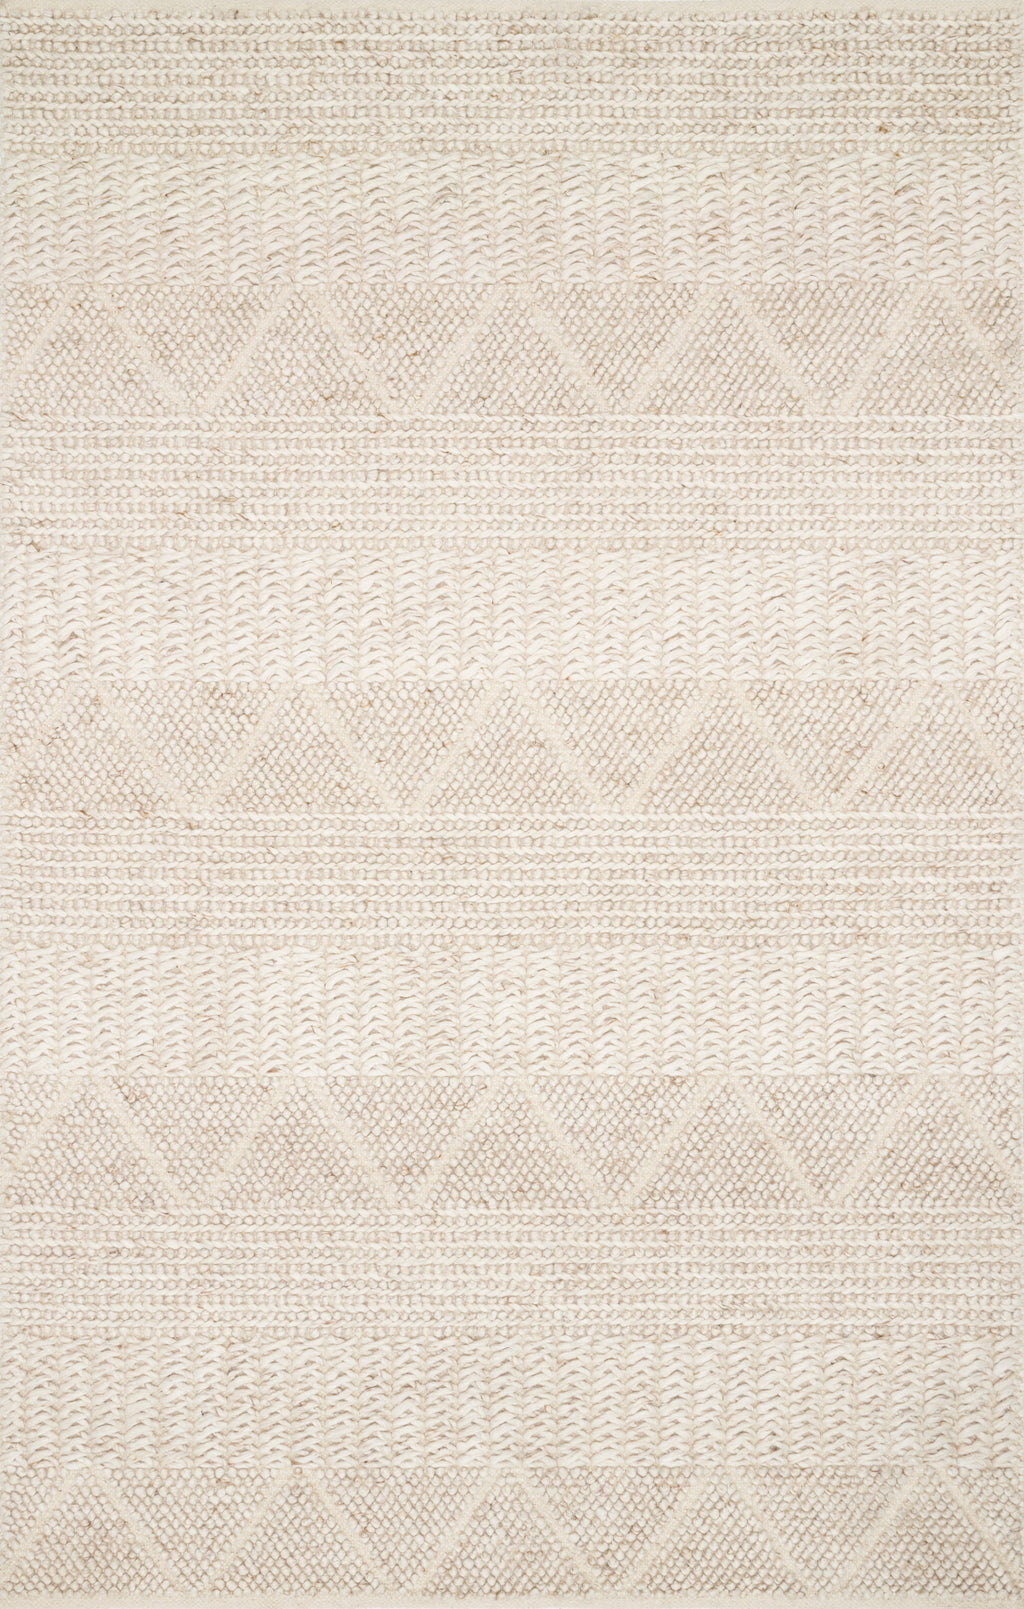 ROWAN Collection Wool Rug  in  SAND Beige Accent Hand-Tufted Wool